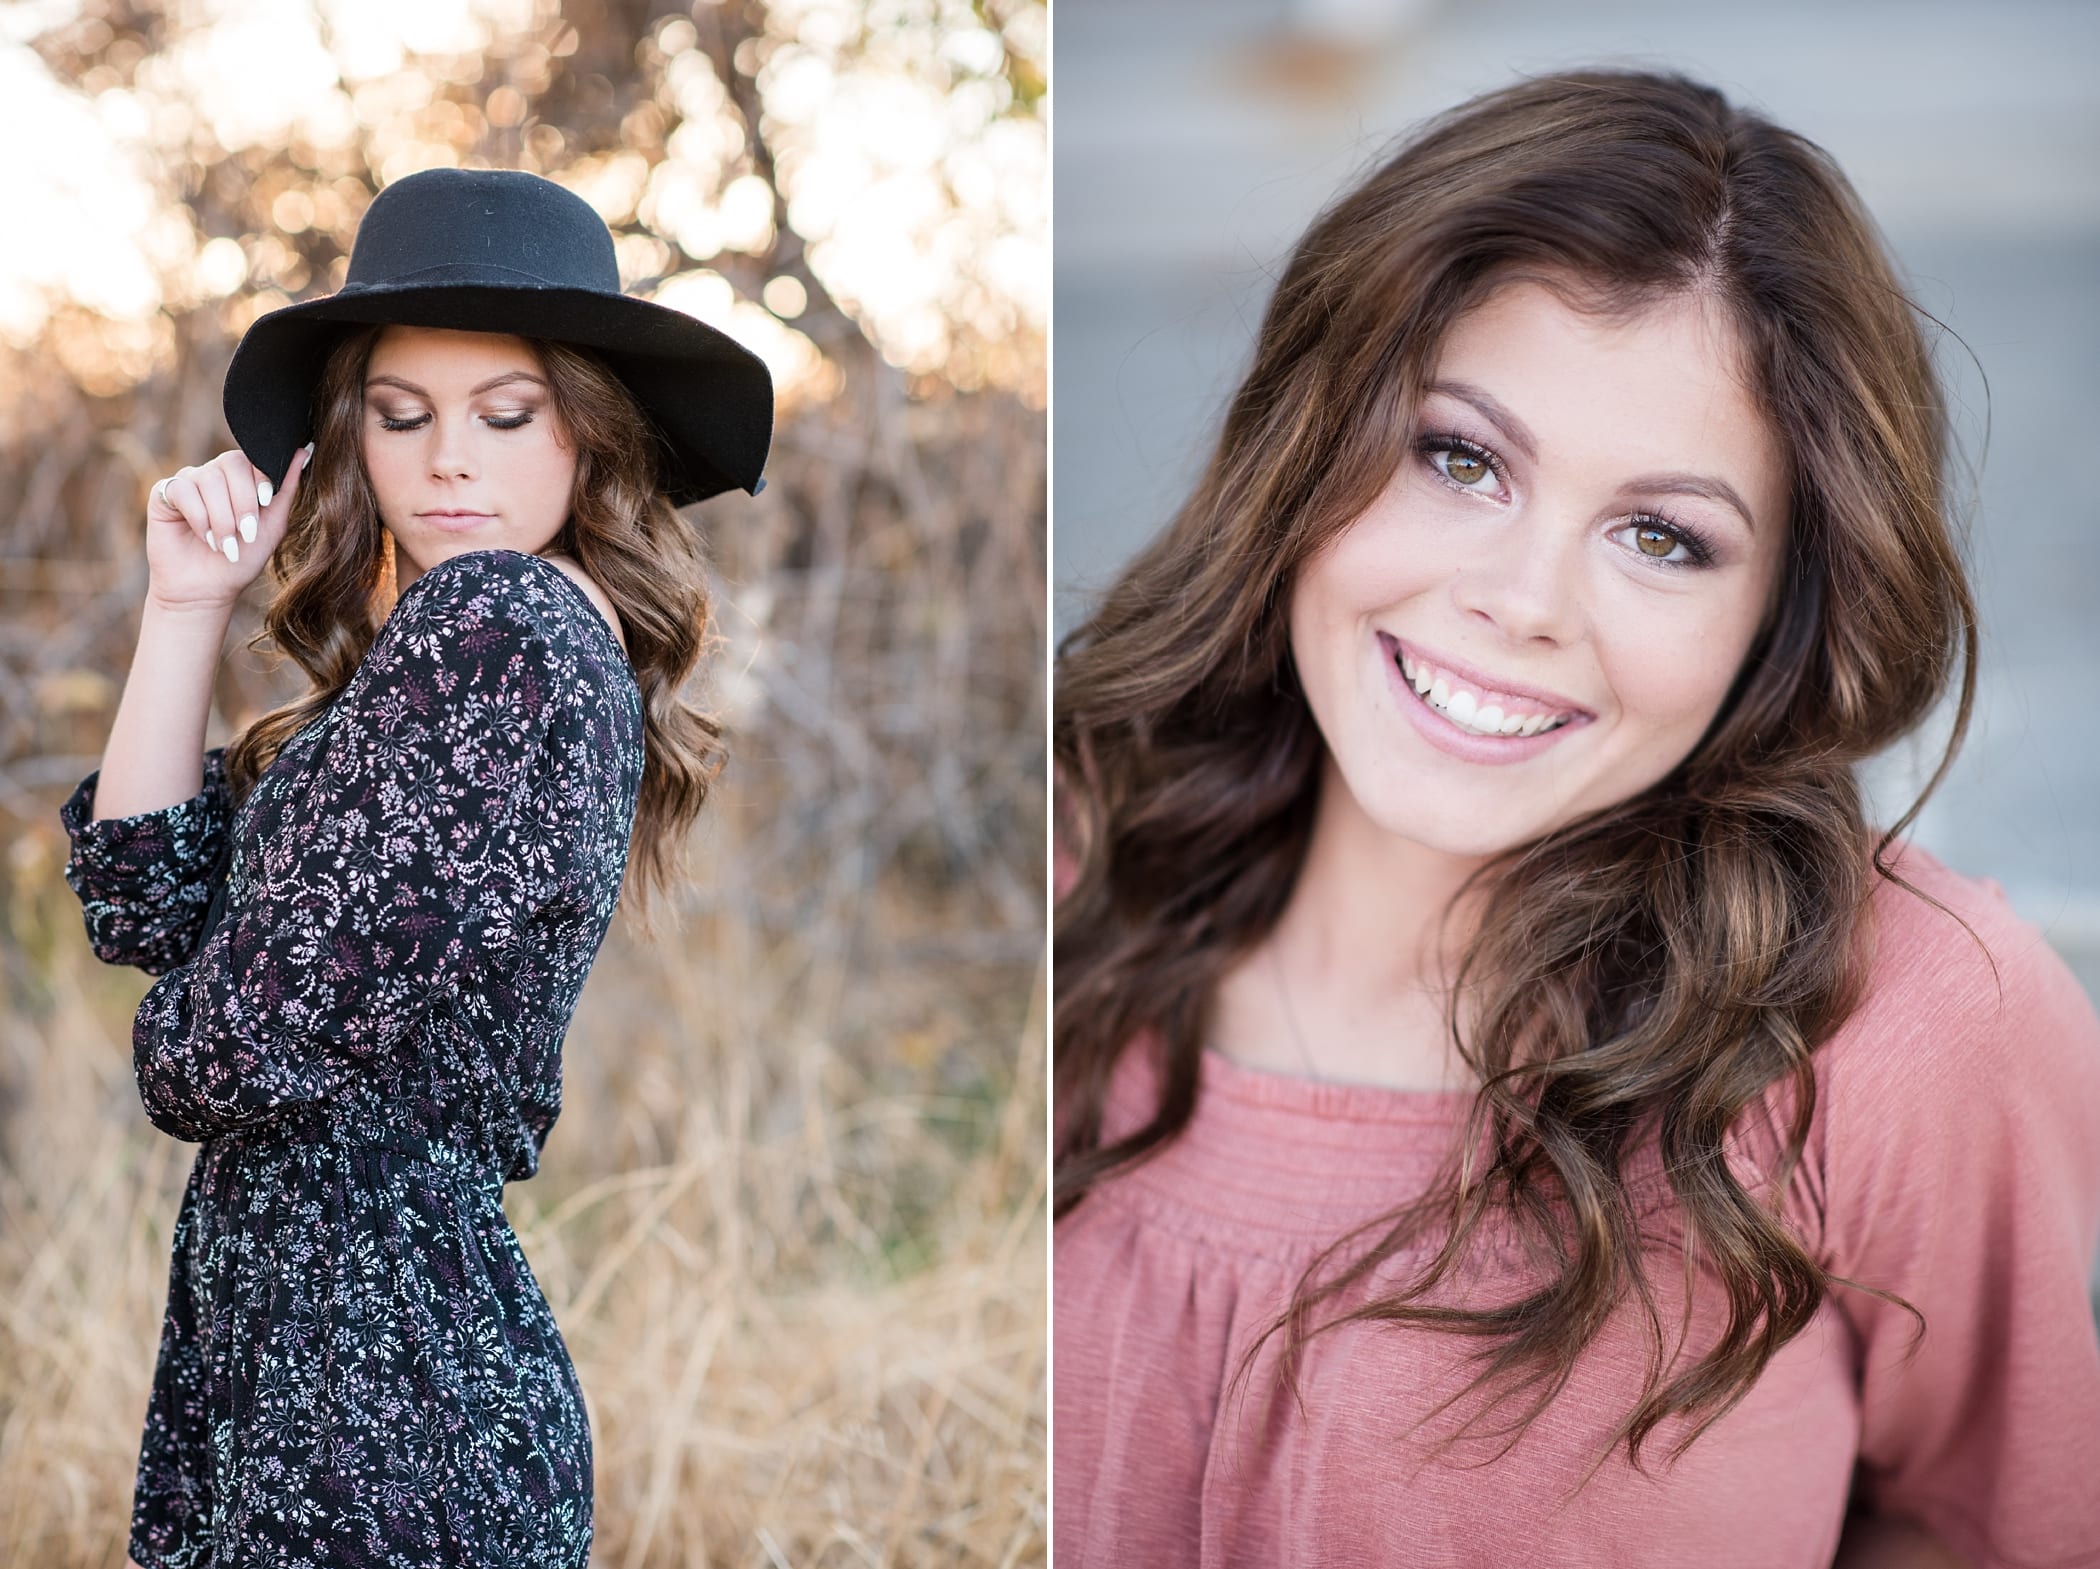 Boho and downtown city senior girl by Michelle & Logan